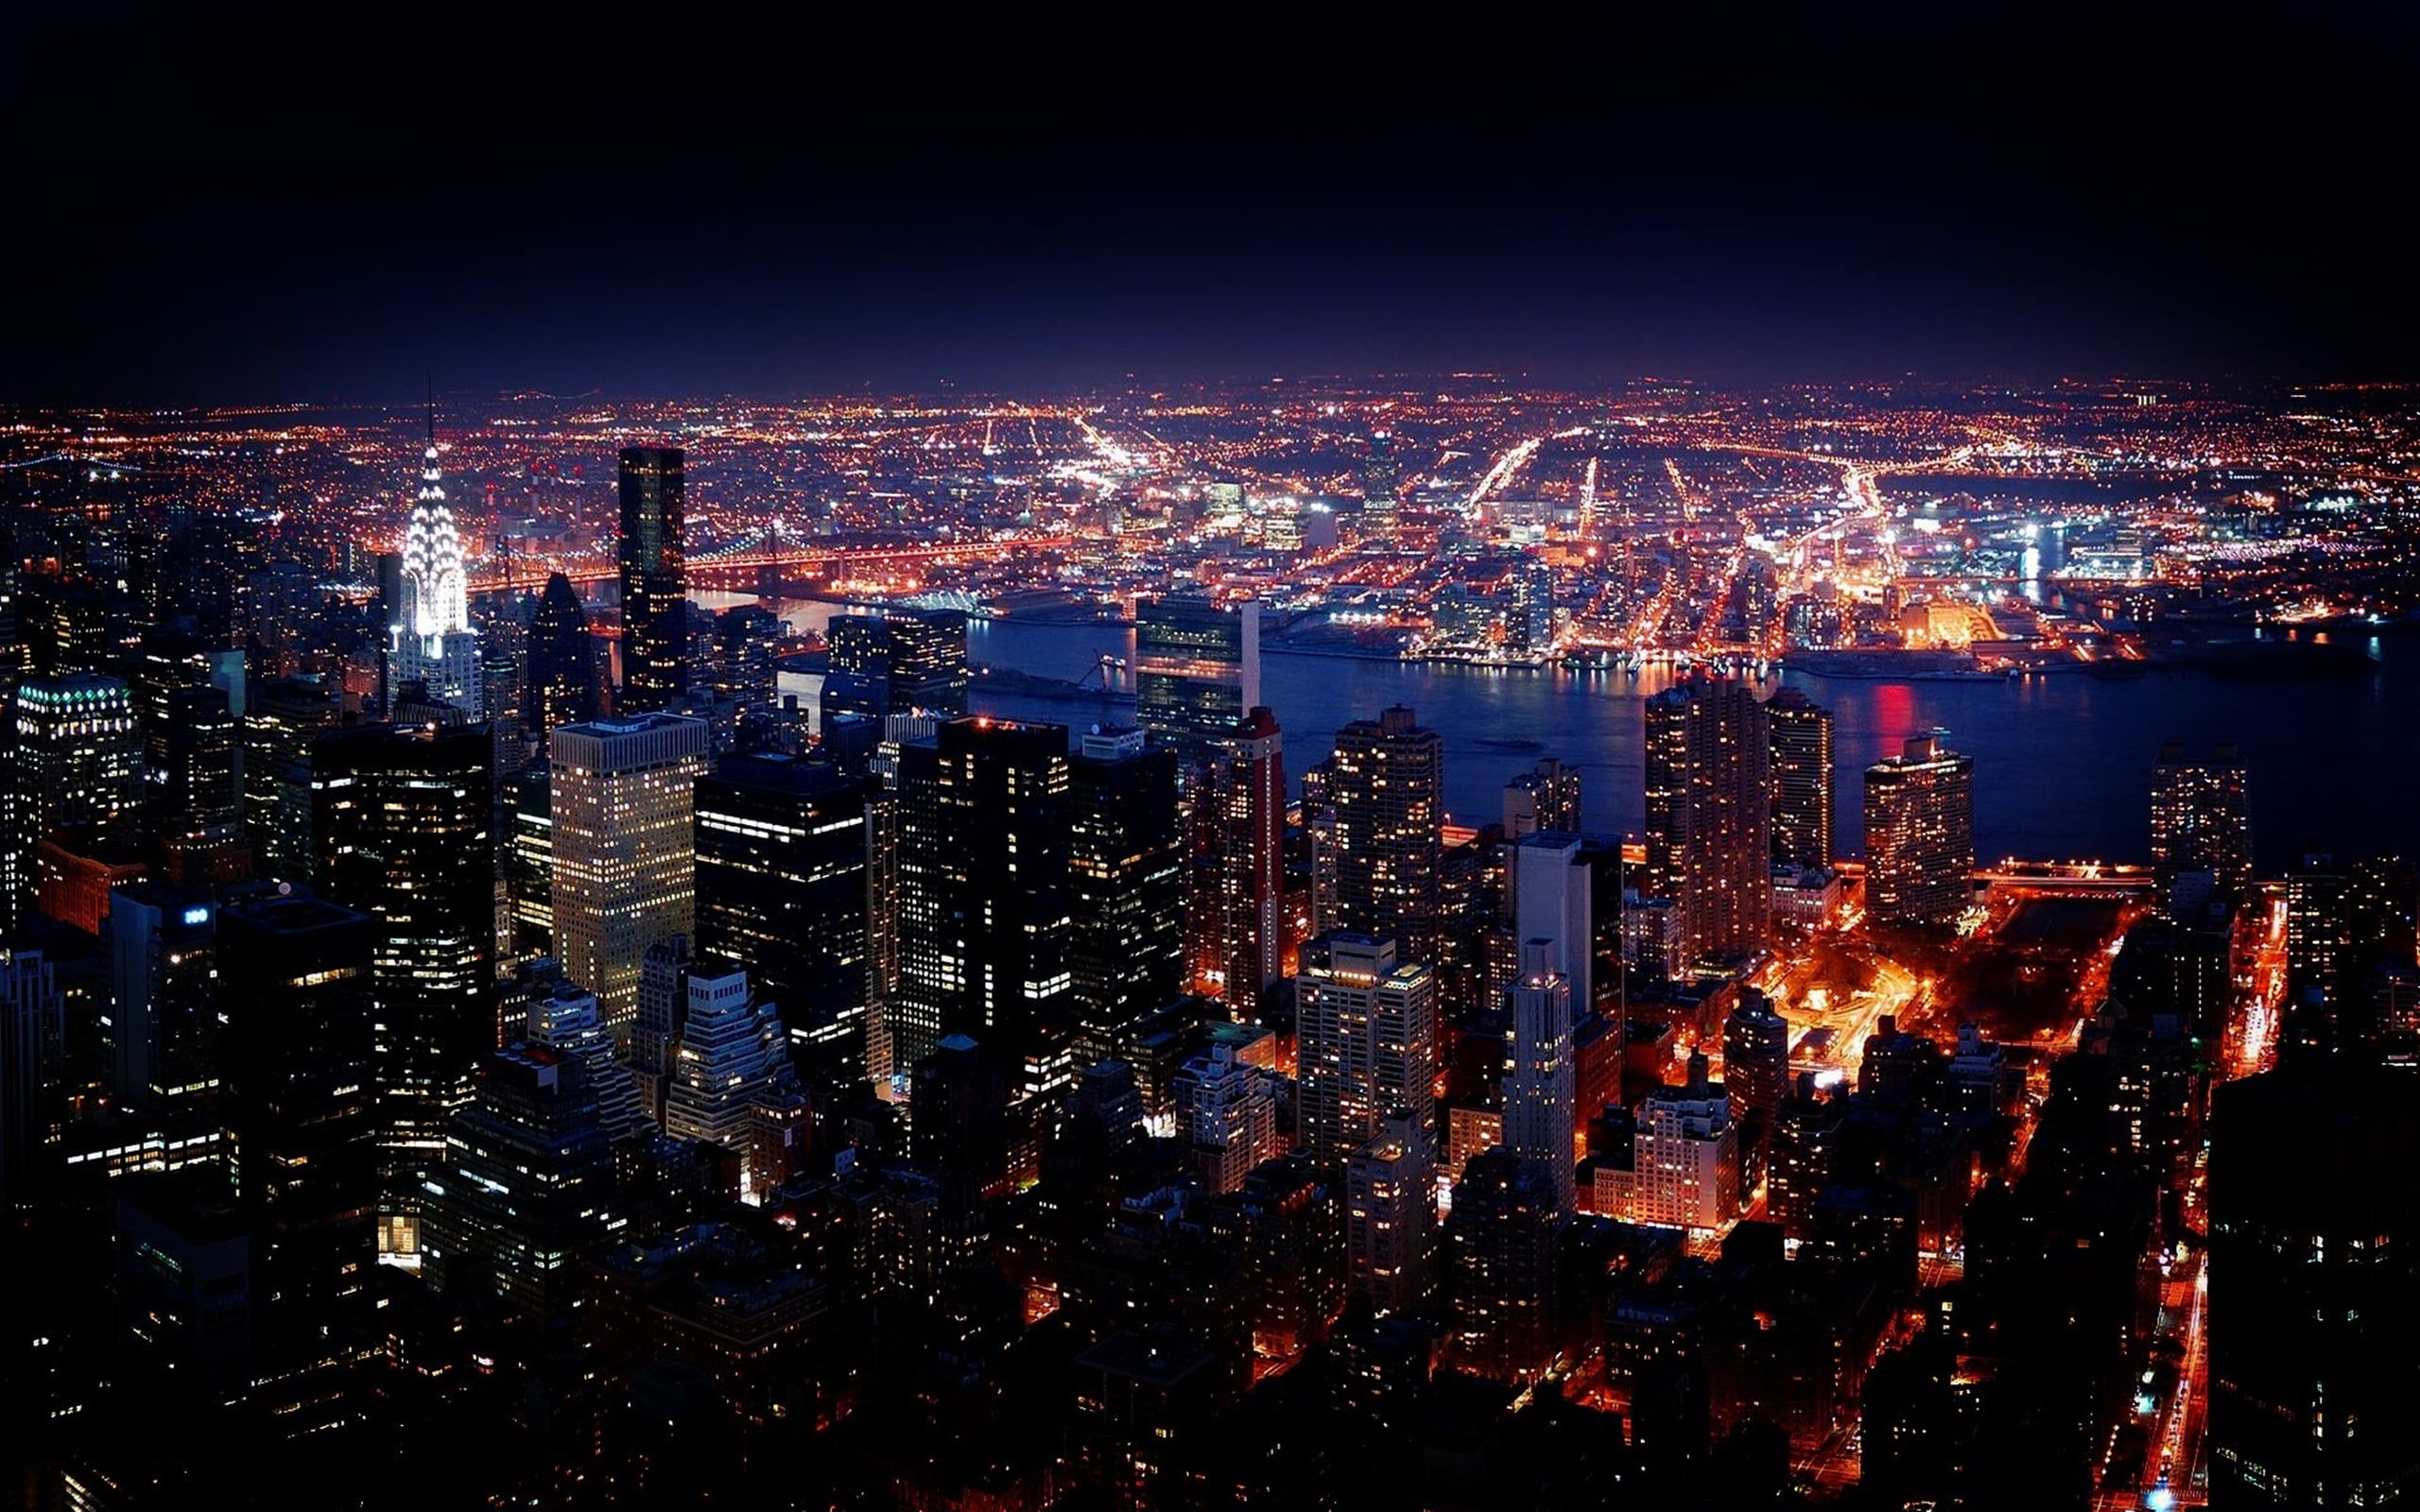 A city at night with lights from buildings - New York